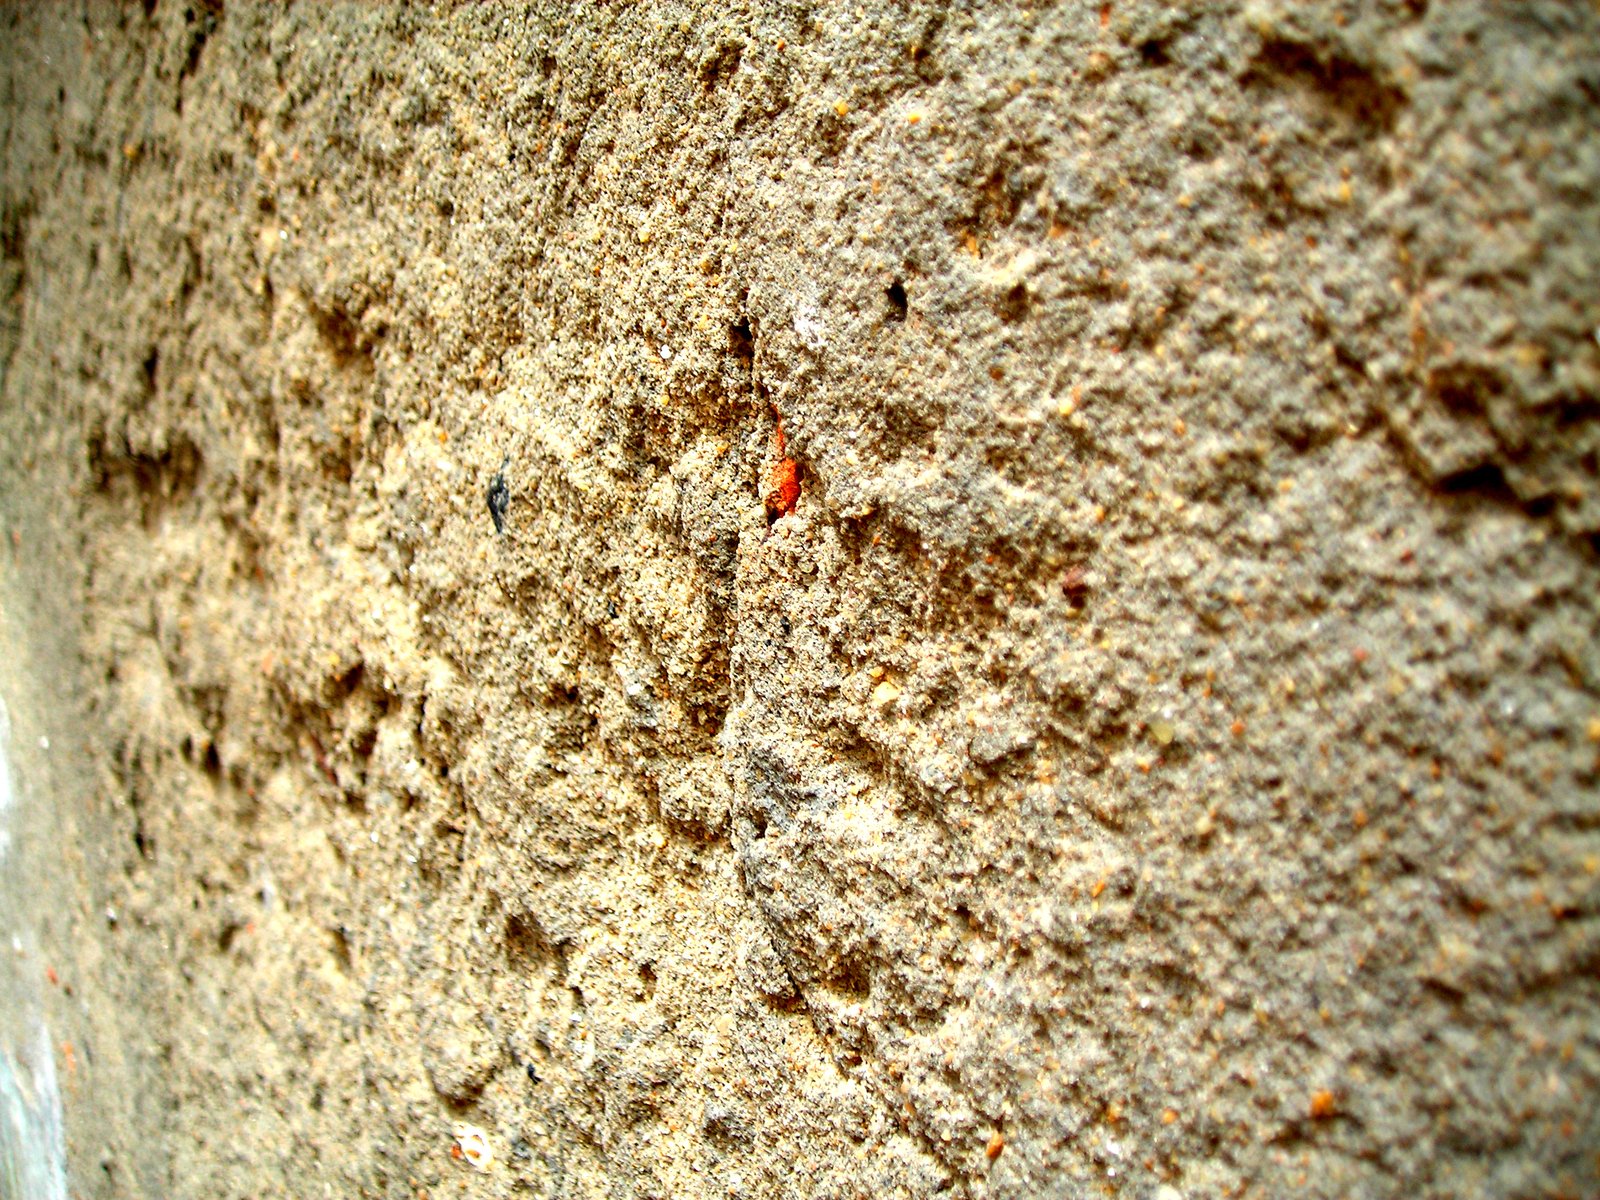 a stone wall with a small insect on it